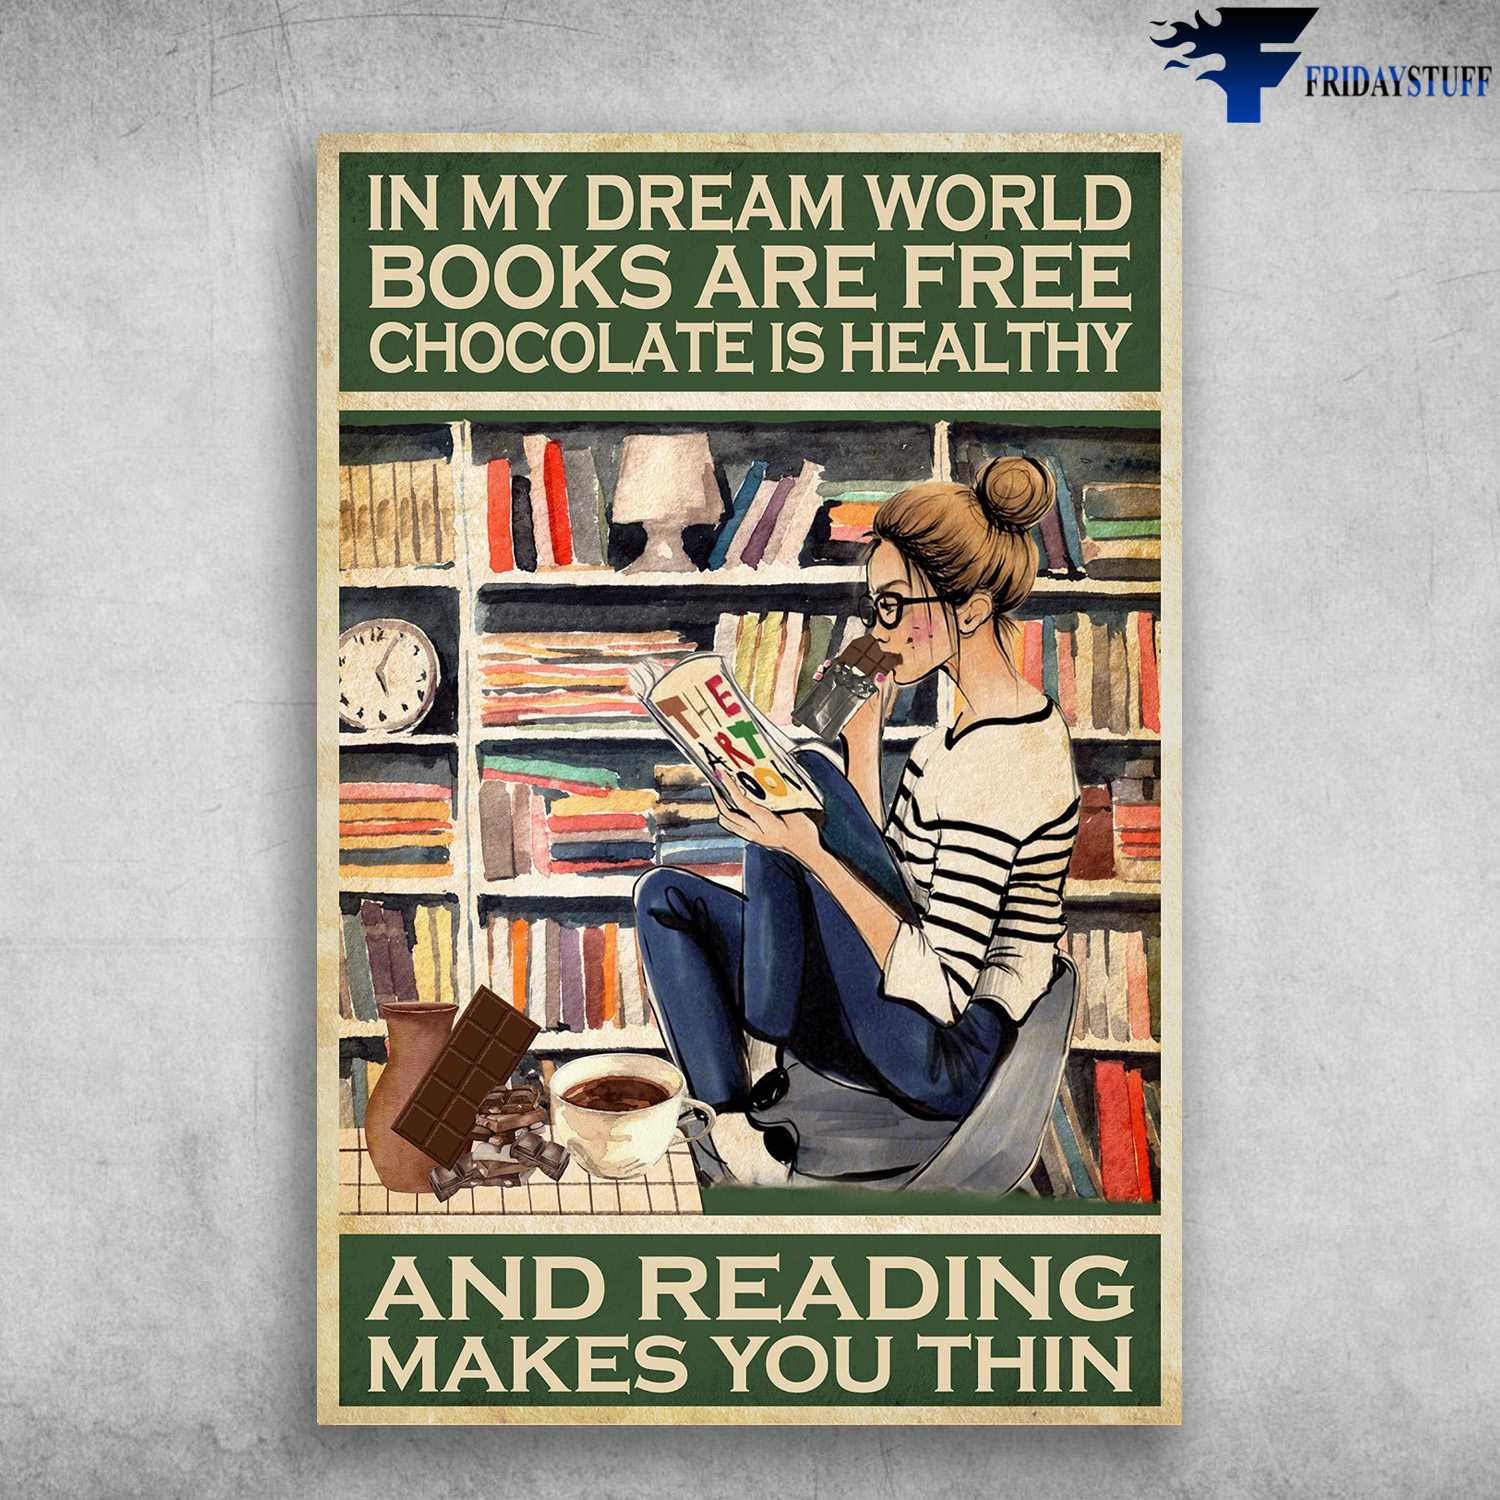 Book Lover, Girl Loves Book, Chocolate Lover, In My Dream World, Books Are Free Chocolate Is Healthy, And Reading Makes You Thin